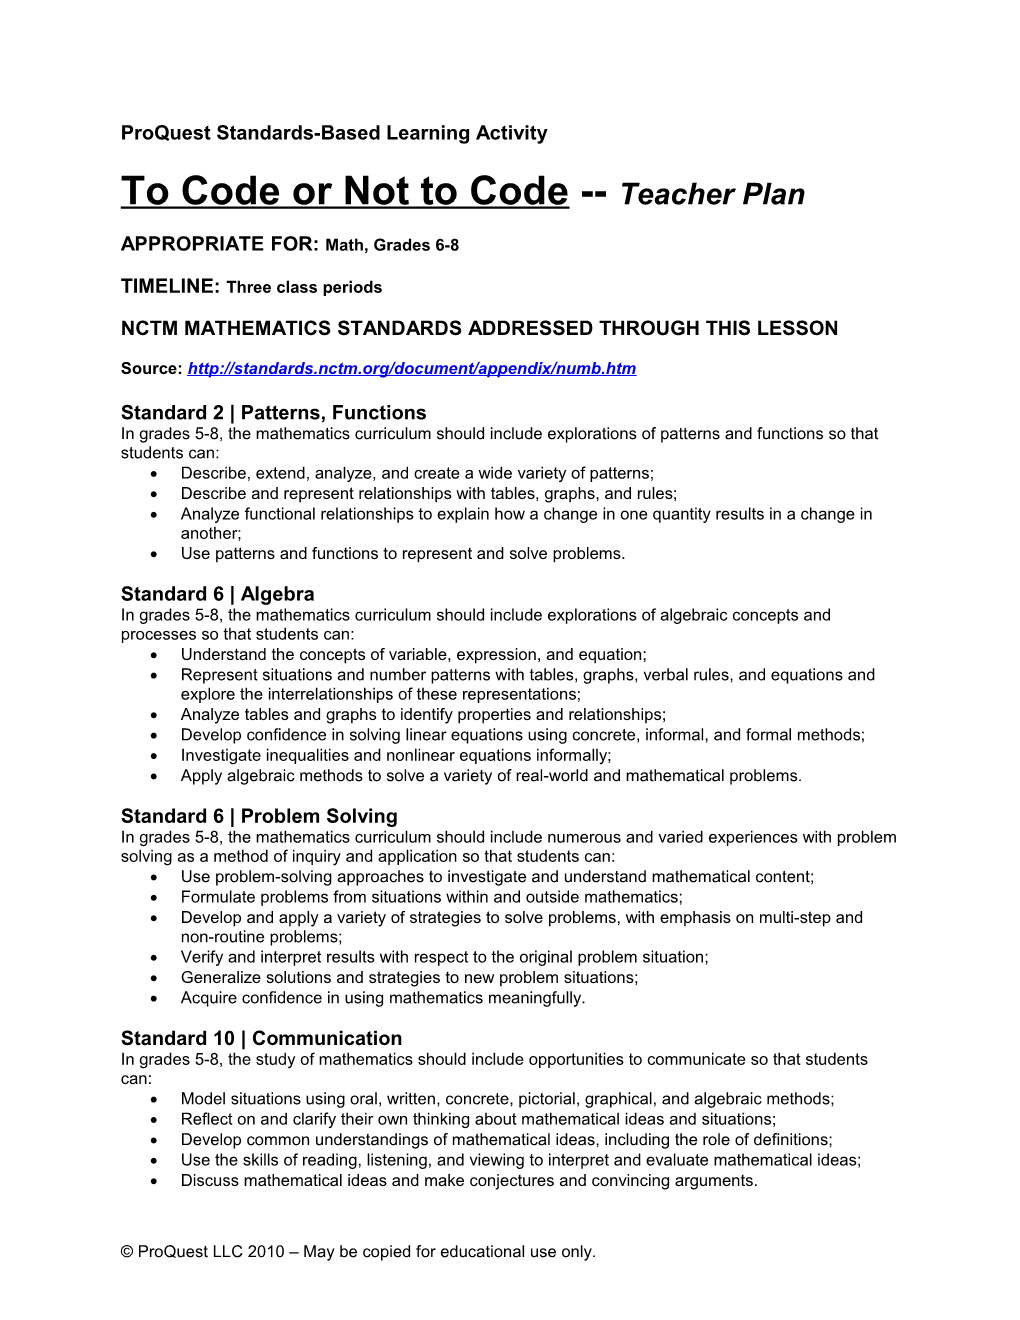 Lesson Plan: Math 6-8 Code Or Not to Code